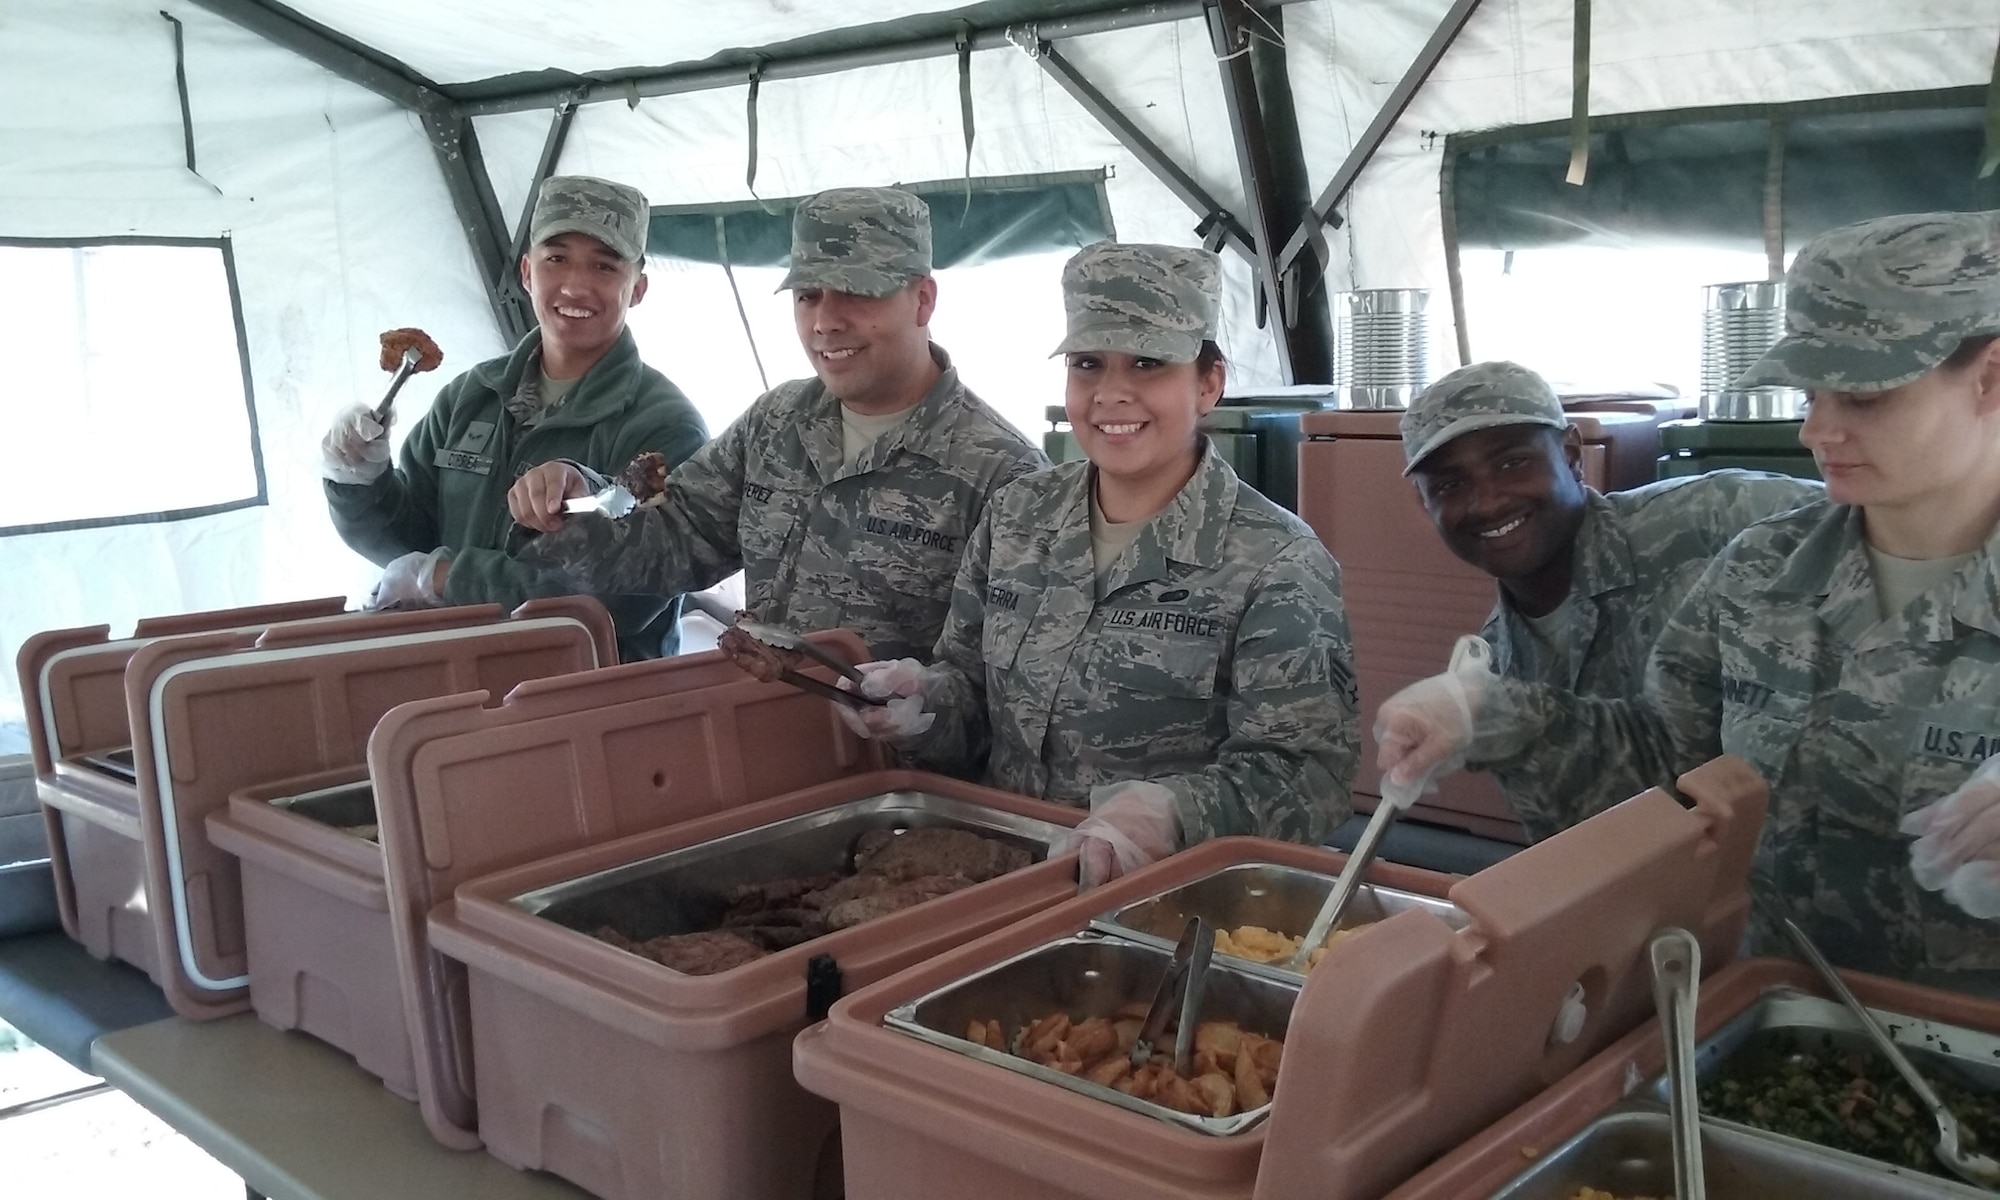 Airmen from the 507th Air Refueling Wing Force Support Squadron Services Sustainment Flight prepare to serve food during a field kitchen training exercise Nov. 7, 2015, at Tinker Air Force Base, Okla. The field kitchen is an Air Force requirement for use at remote and undeveloped sites.  (U.S. Air Force photo by Senior Airman Chelsea Thomas) 